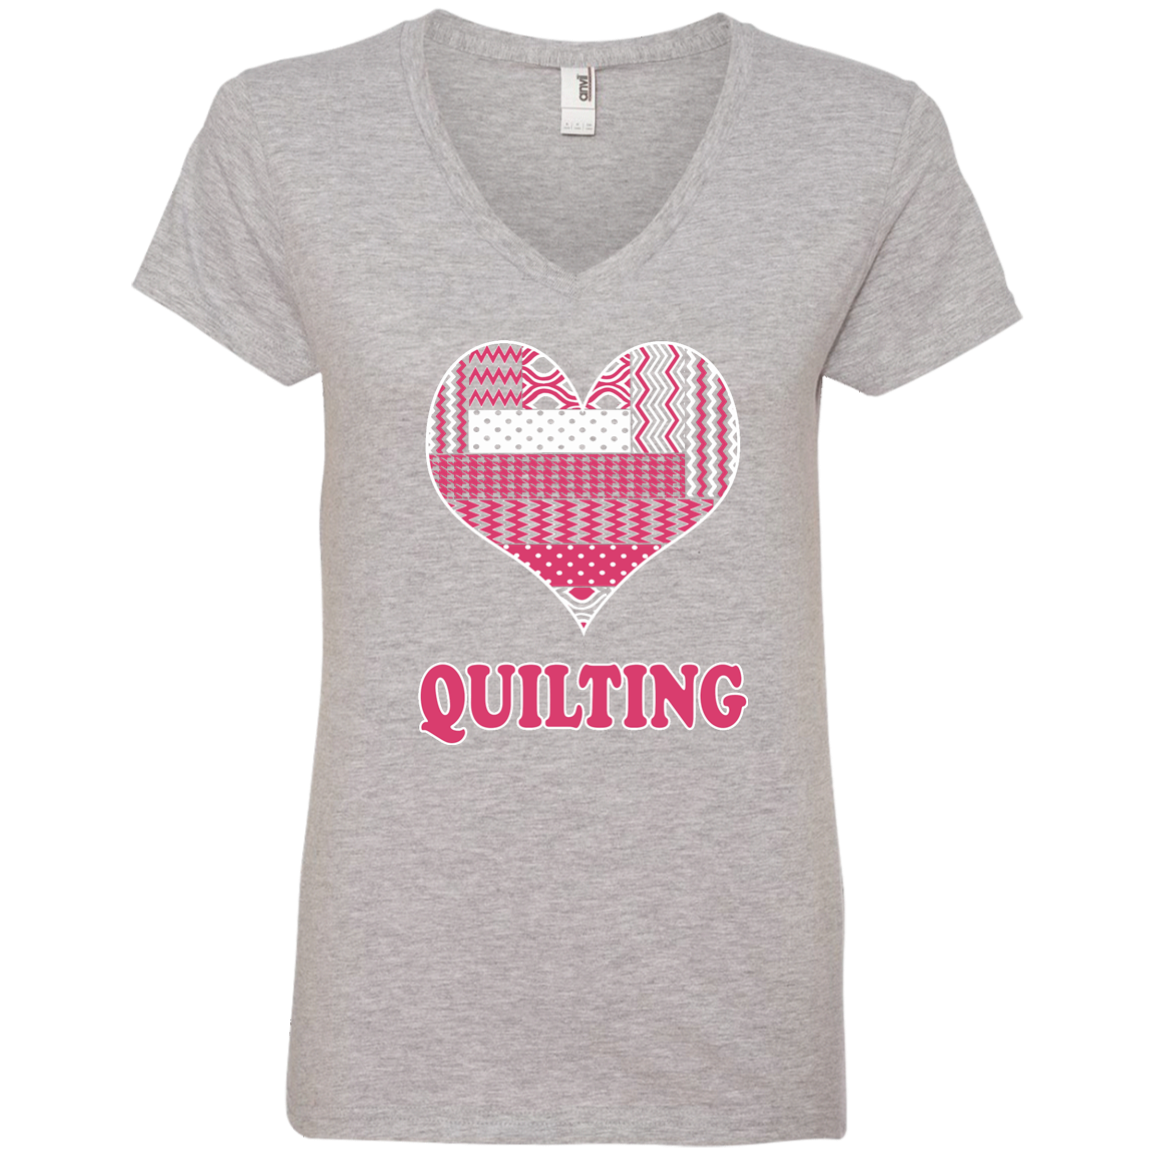 Heart Quilting Ladies V-neck Tee - Crafter4Life - 1